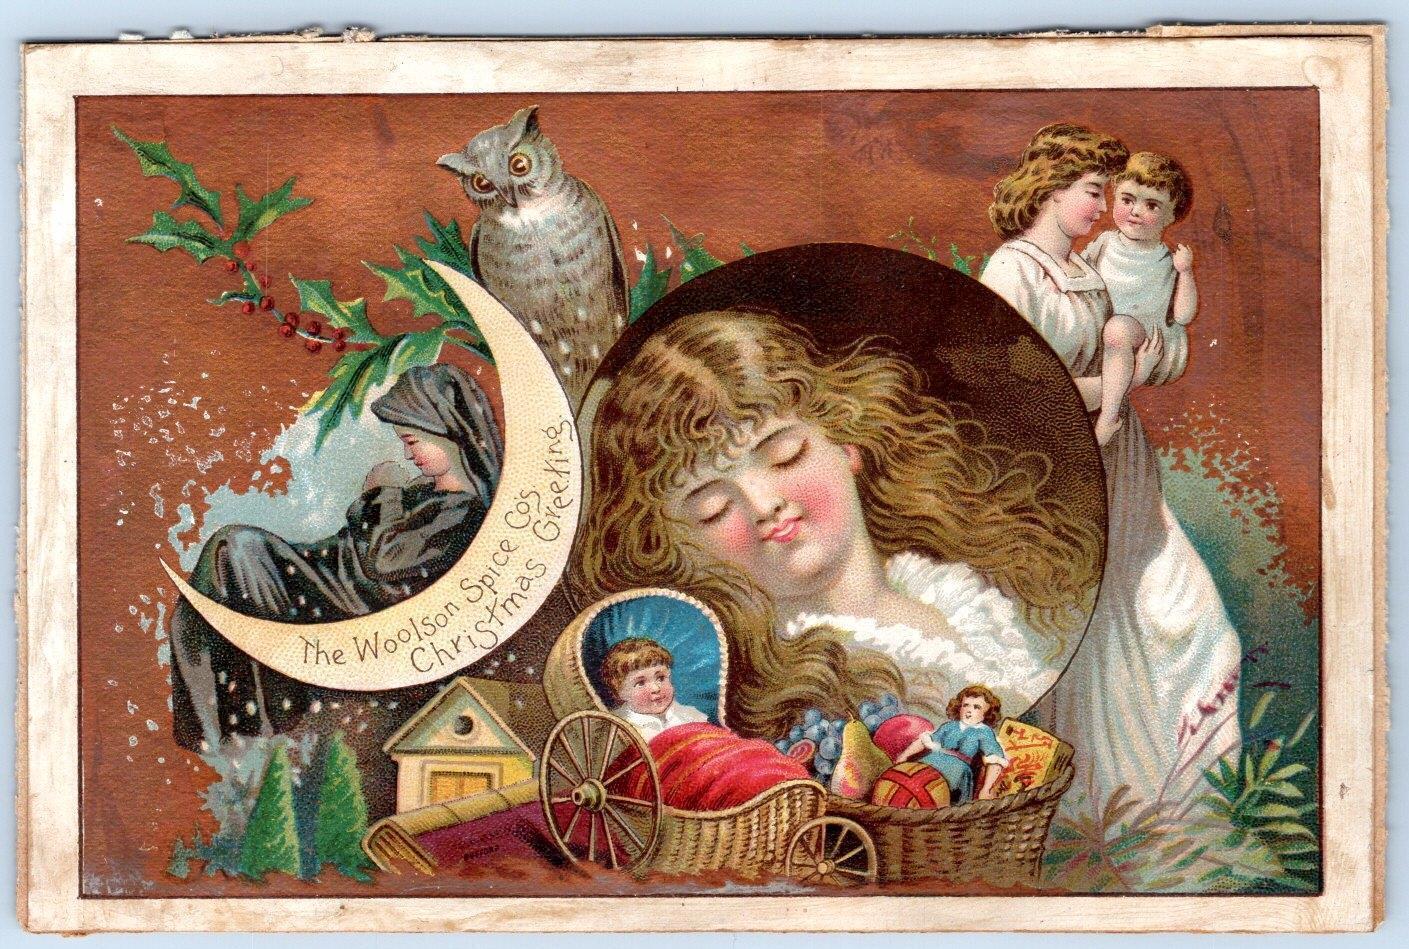 WOOLSON SPICE CO CHRISTMAS GREETINGS*GIRL DREAMS OF TOYS*CRESCENT MOON*OWL*HOLLY